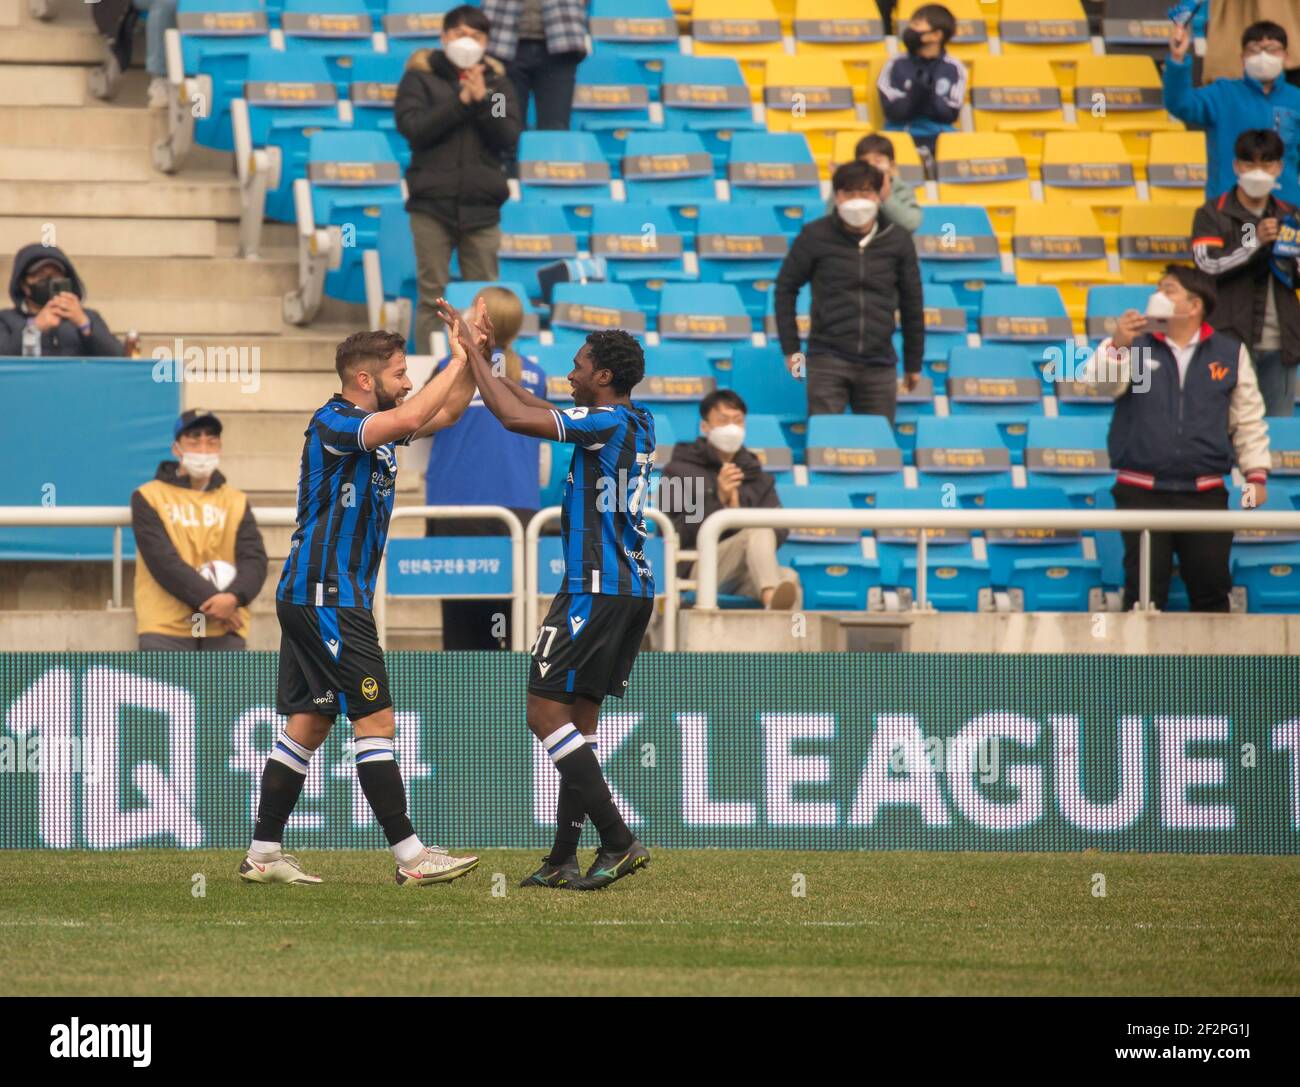 Incheon, South Korea. 06th Mar, 2021. Costa Rican midfielder Elias Aguilar (L) and Brazilian striker Guilherme Ferreira Pinto of Incheon United FC celebrate together after Elias Aguilar scored a goal during the 2nd round of the 2021 K League 1 soccer match between Incheon United FC and Daegu FC at the Incheon Football Stadium.(Final score; Incheon United FC 2:1 Daegu FC) (Photo by Jaewon Lee/SOPA Images/Sipa USA) Credit: Sipa USA/Alamy Live News Stock Photo